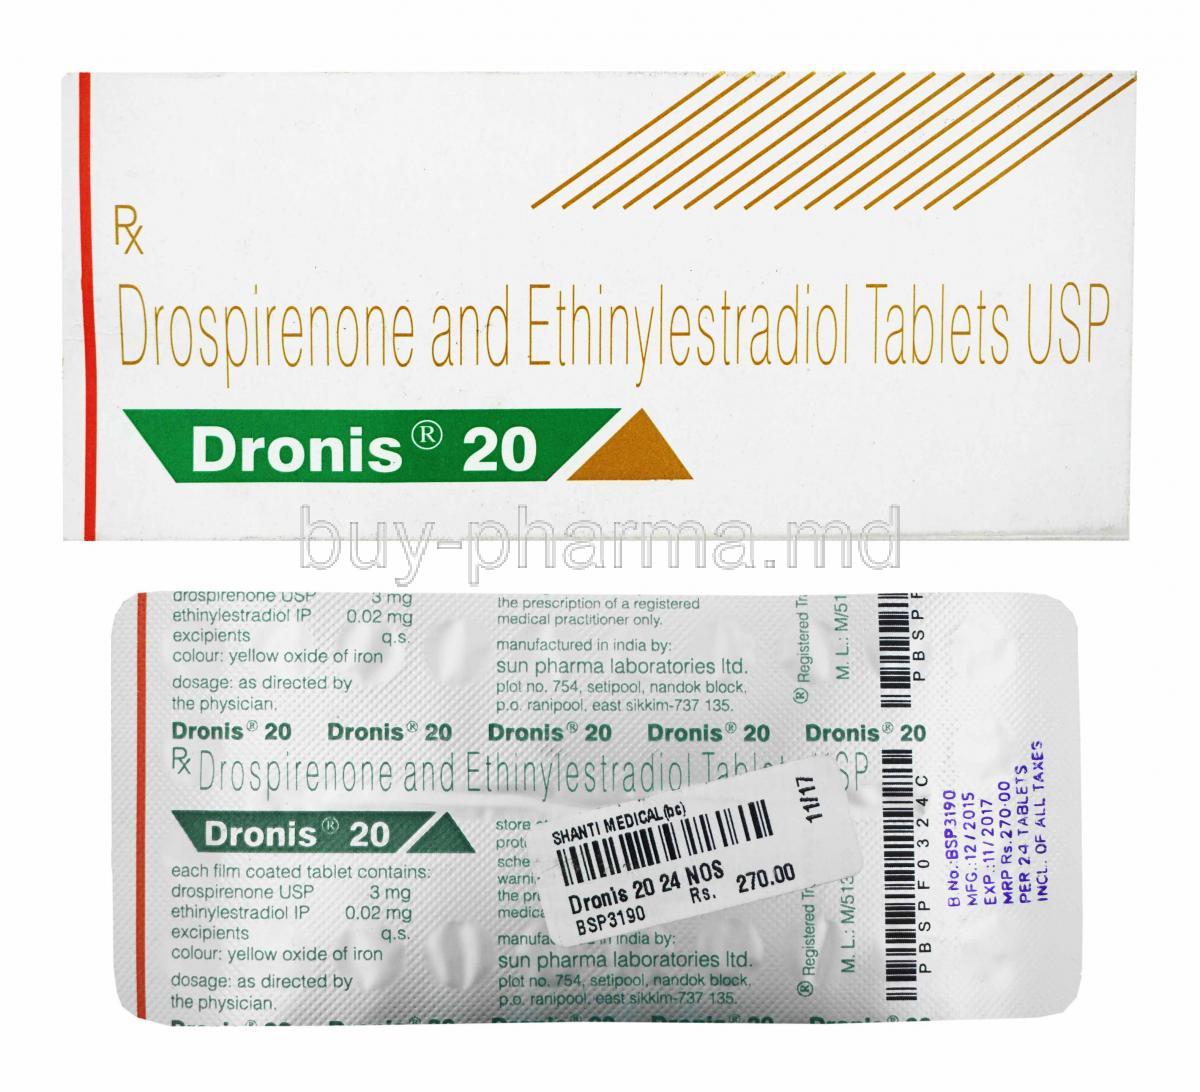 Dronis, Ethinyl Estradiol 0.03mg and Drospirenone 3mg box and tablets